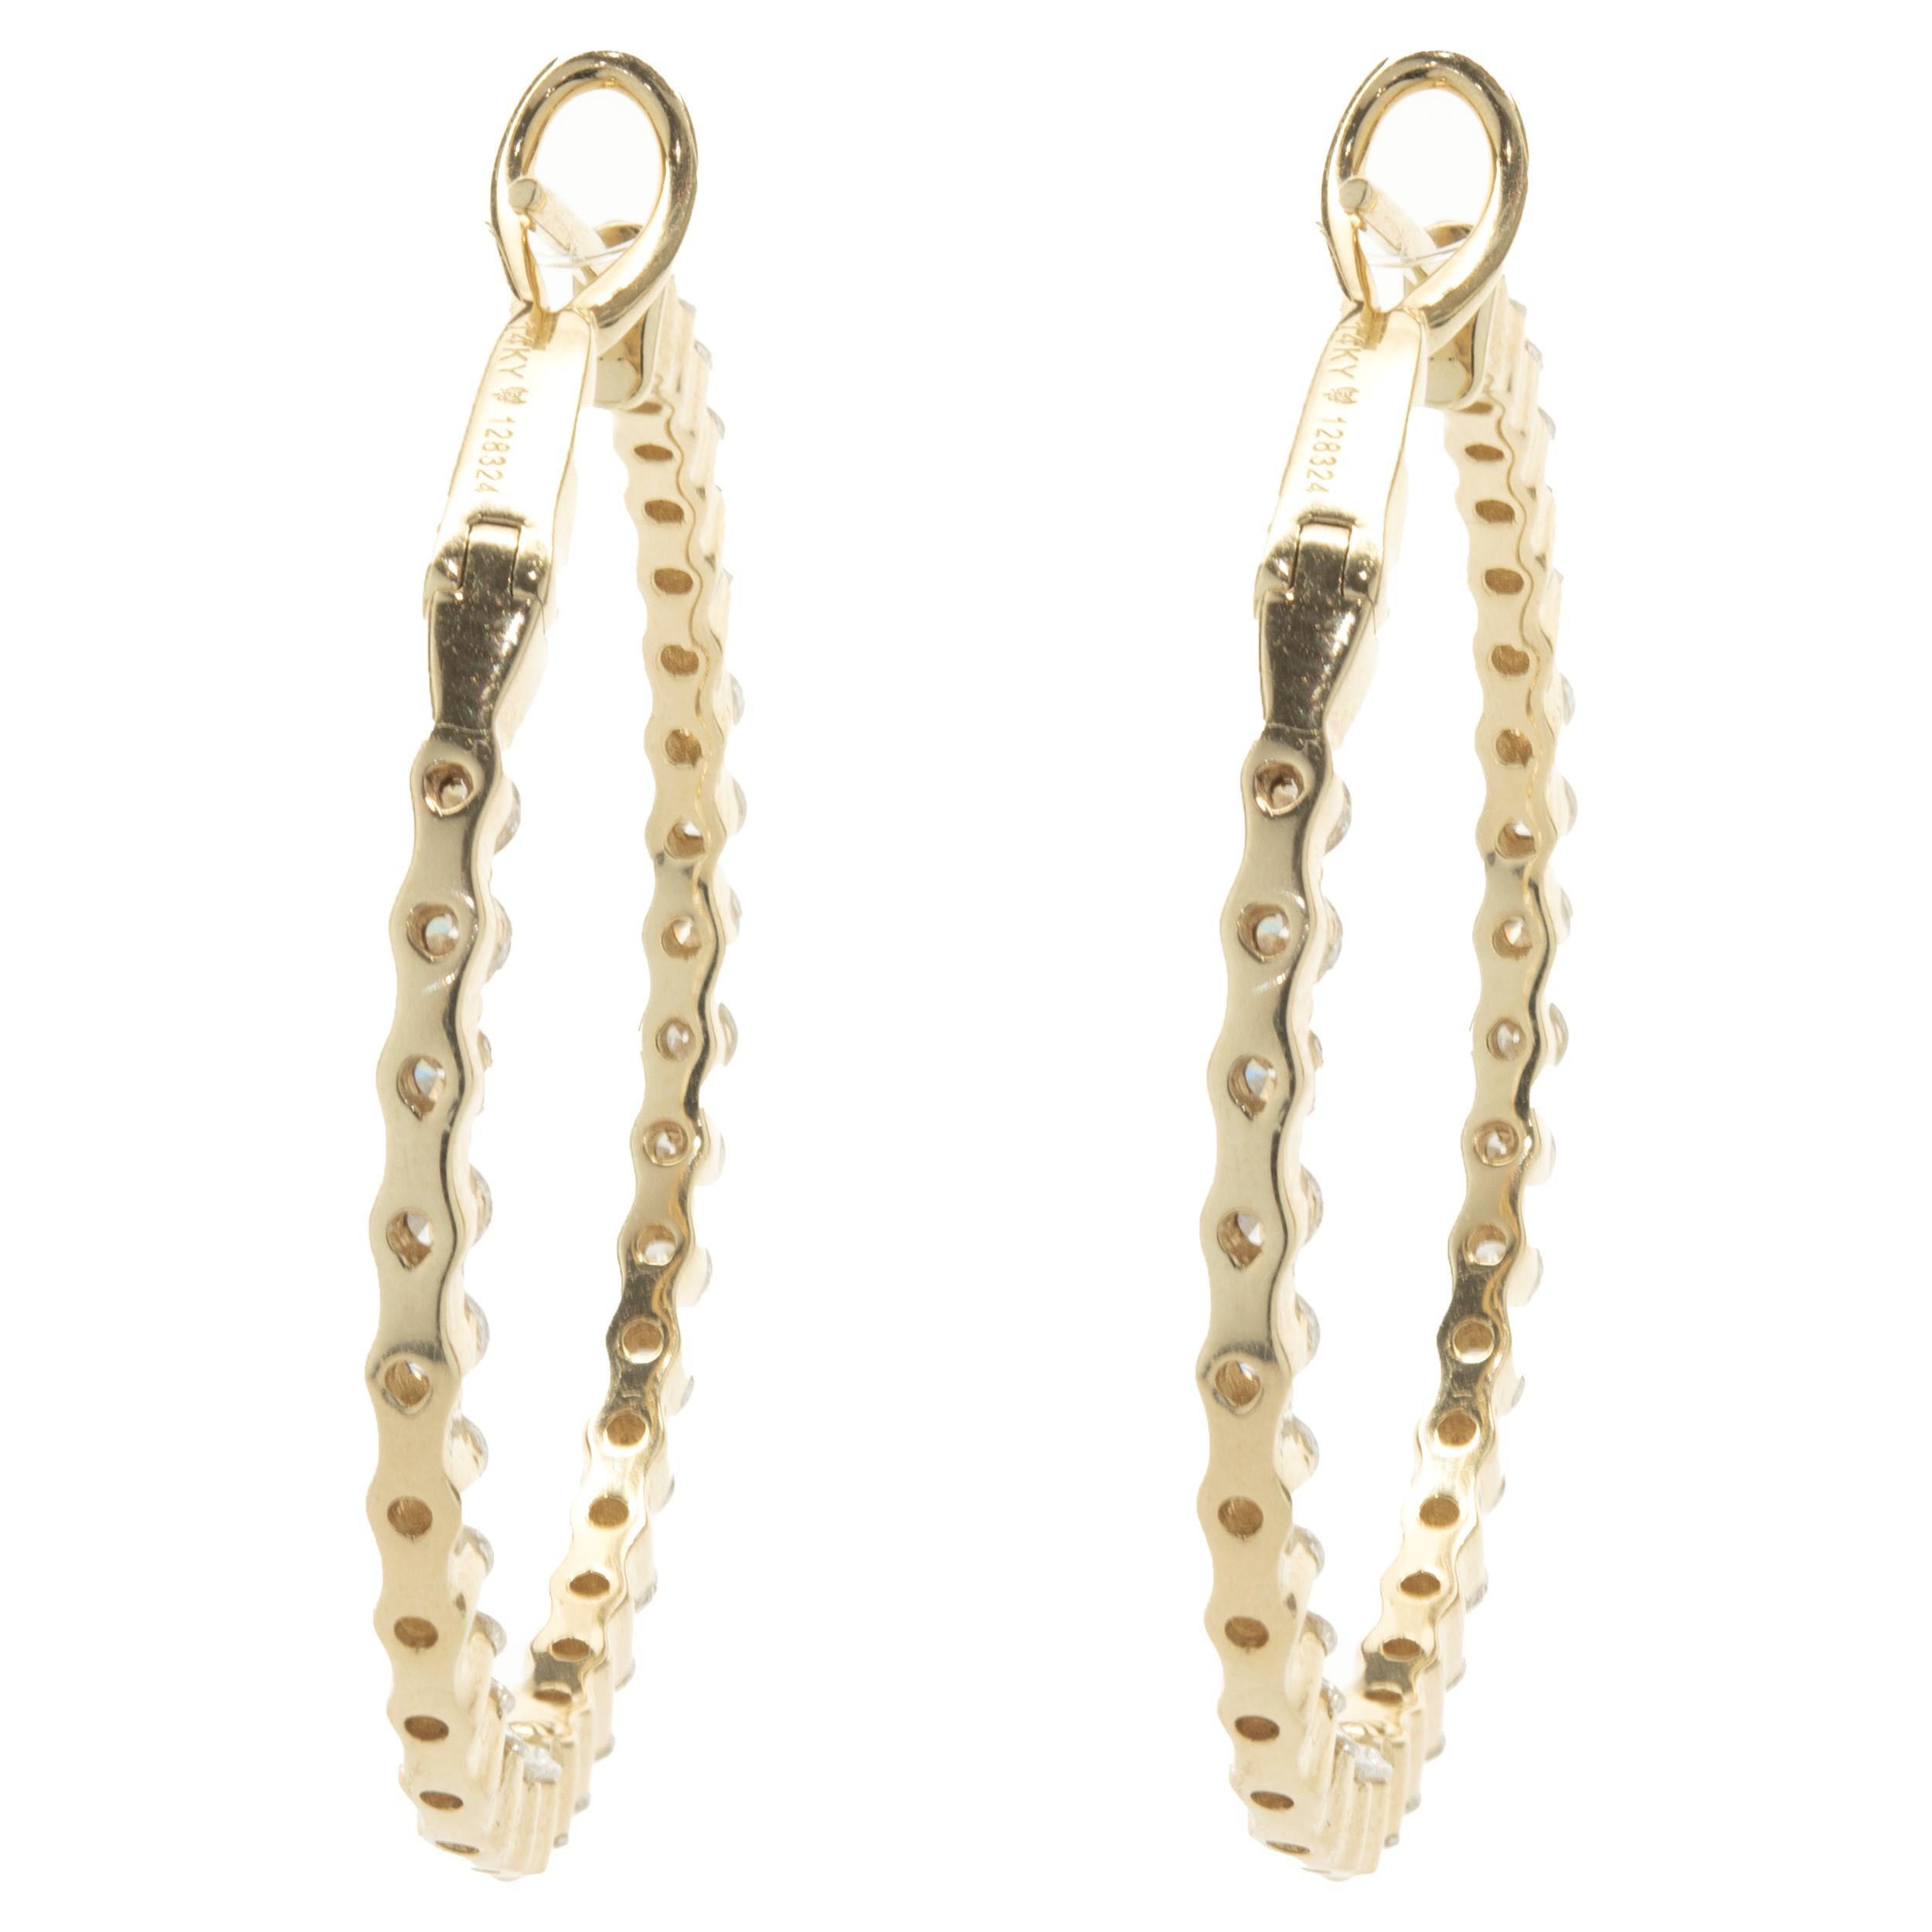 Designer: custom
Material: 14K yellow gold
Diamond: 62 round brilliant = 3.29cttw
Color: G
Clarity: VS1-2
Dimensions: earrings measure 38mm in length
Fastenings: post with omega backs
Weight: 11.31 grams